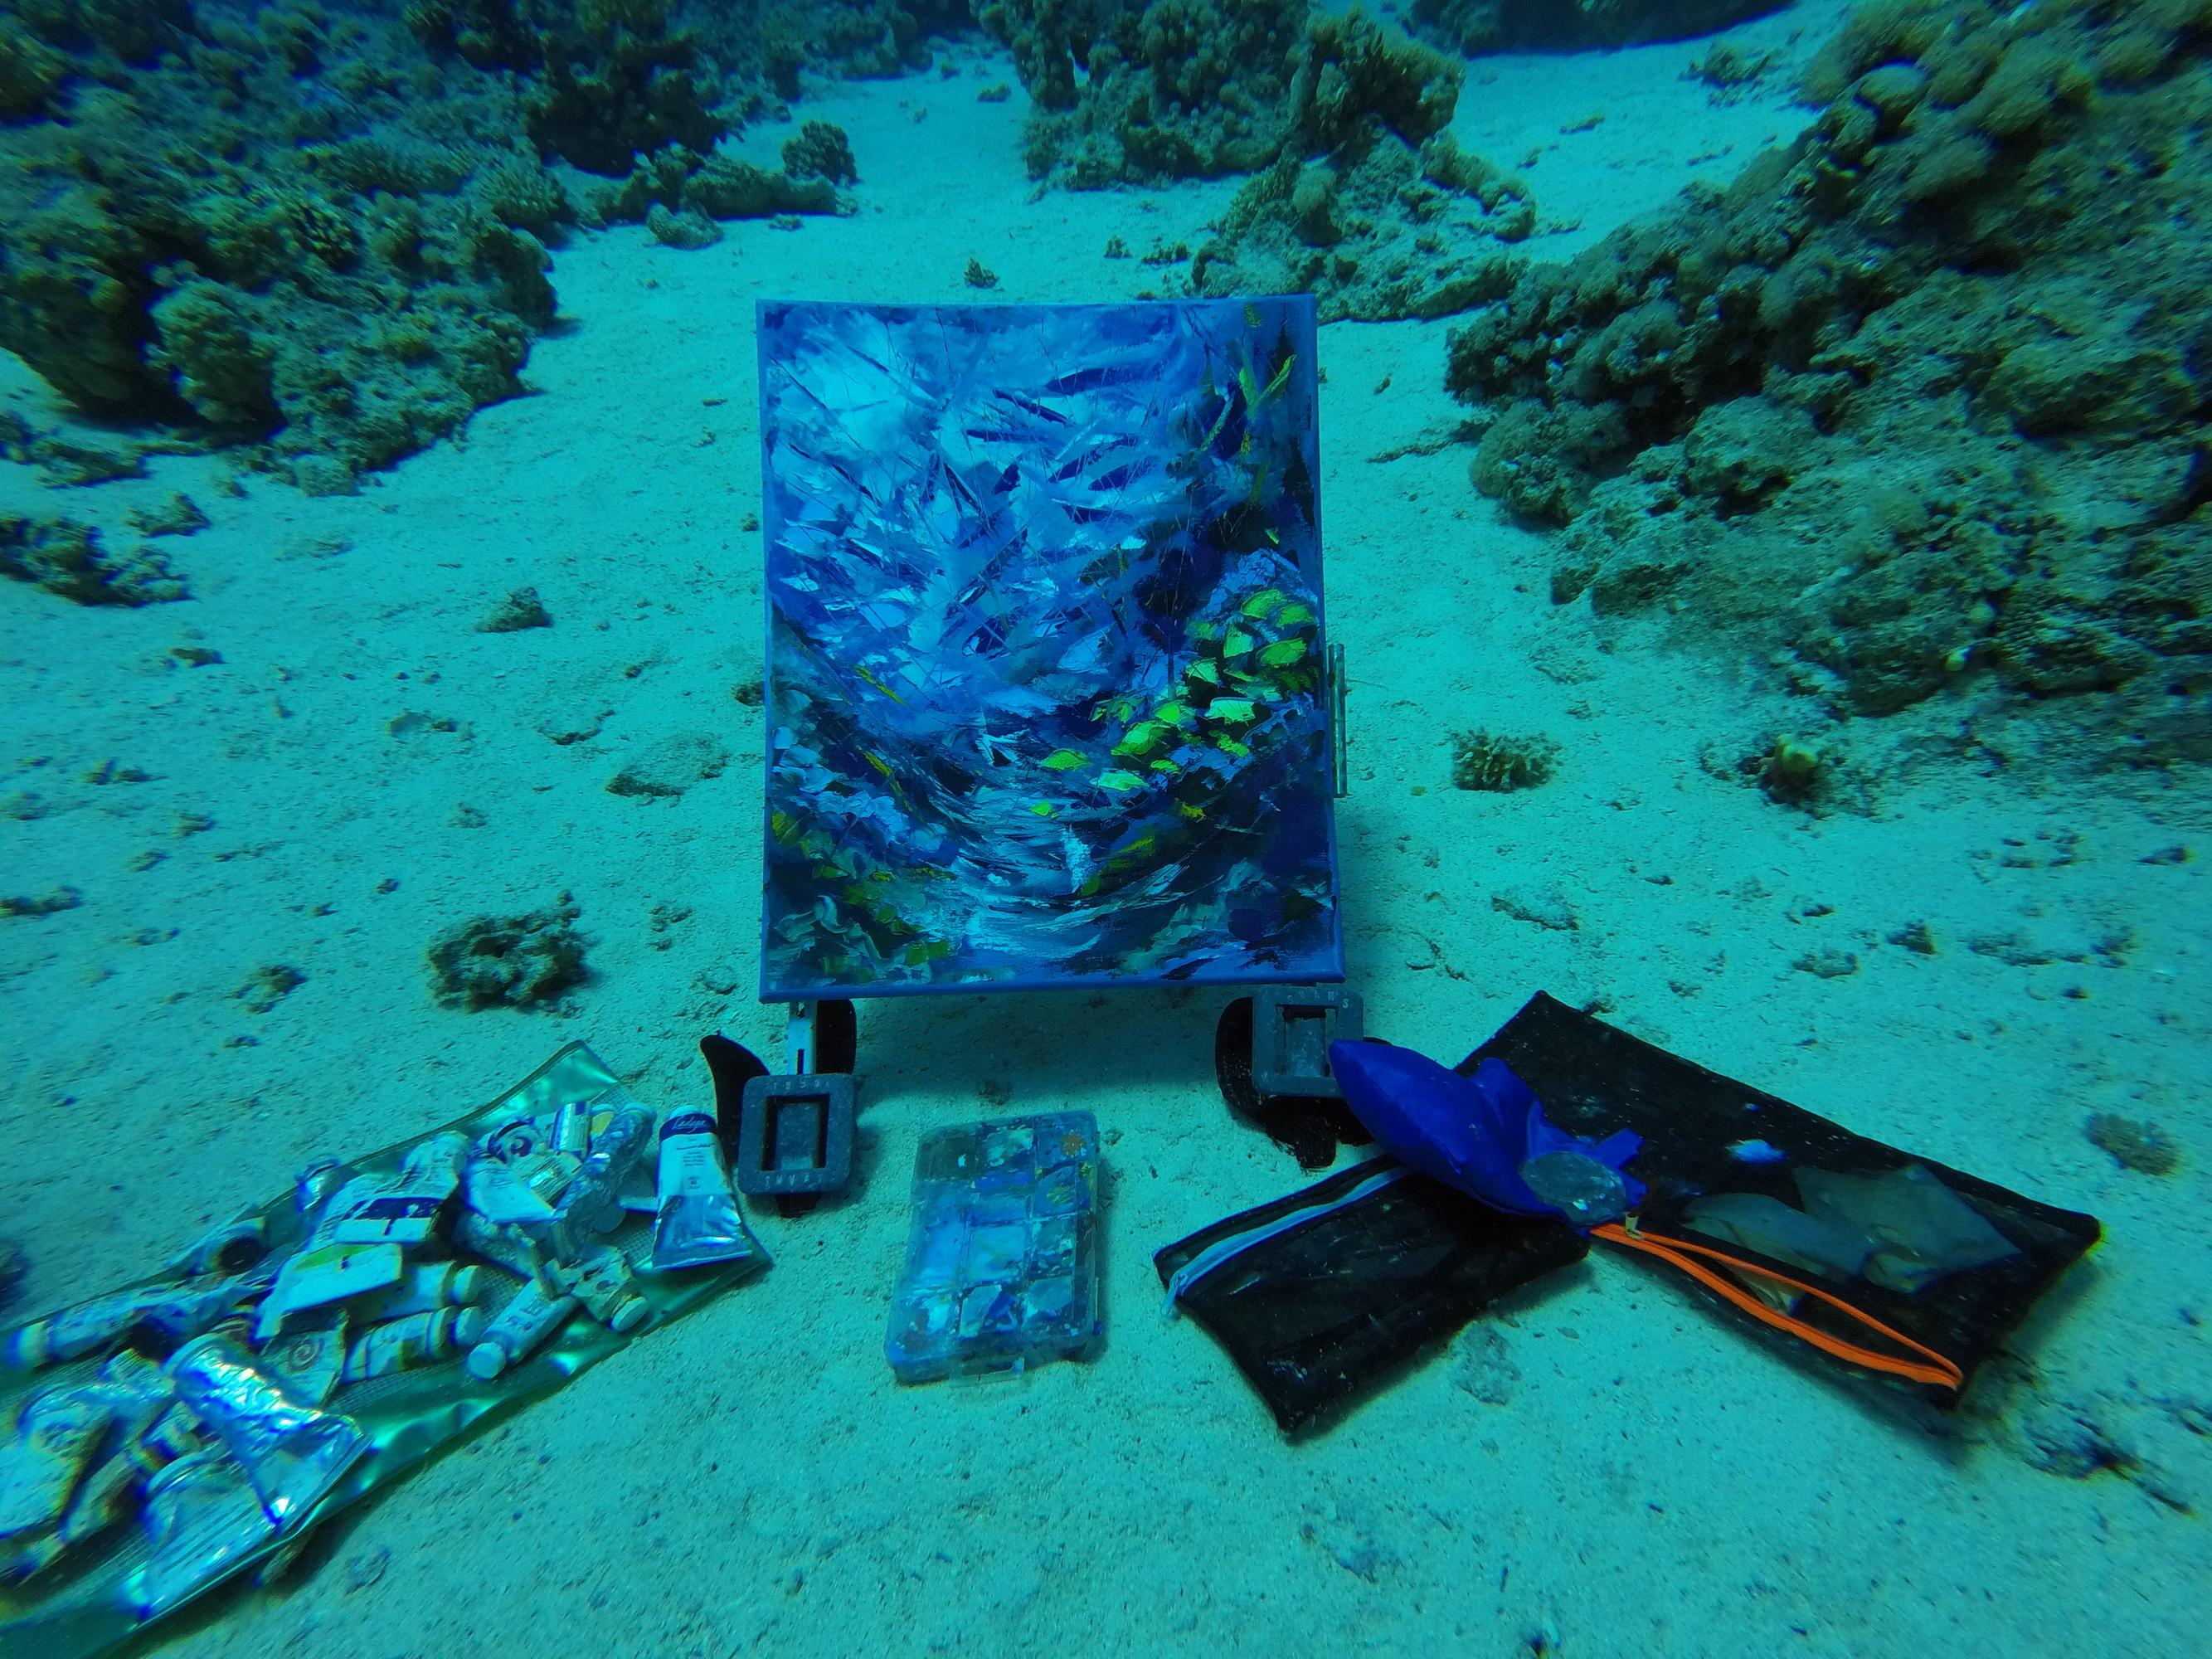 Underwater painting a new fast growing direction in contemporary art. Artwork was crated underwater at the depth of  15.3 meters, underwater painting session 55 minutes. It is intuitive painting, based on feelings and emotions in the particular